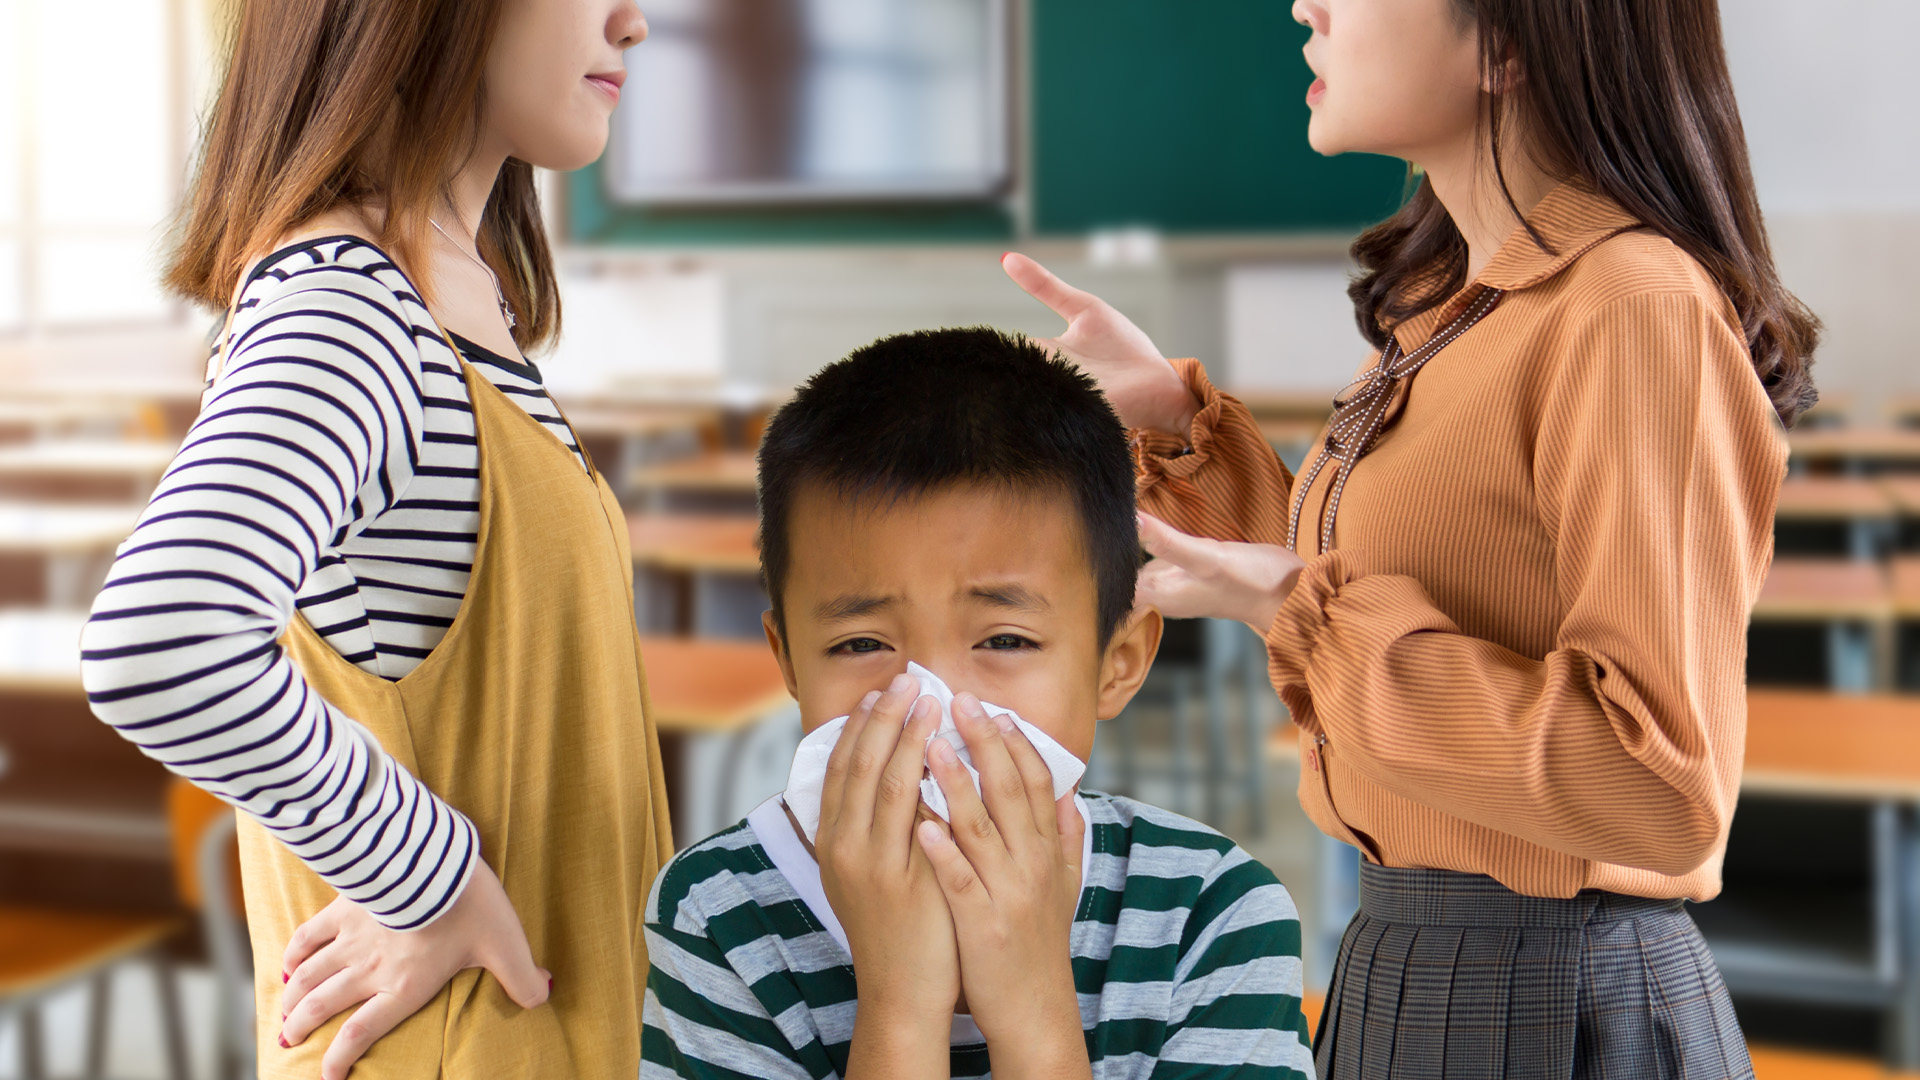 A mother in China has accused her son’s school of depriving her boy of his right learn after he was separated from his classmates because he was running a high fever. Photo: SCMP composite/Shutterstock